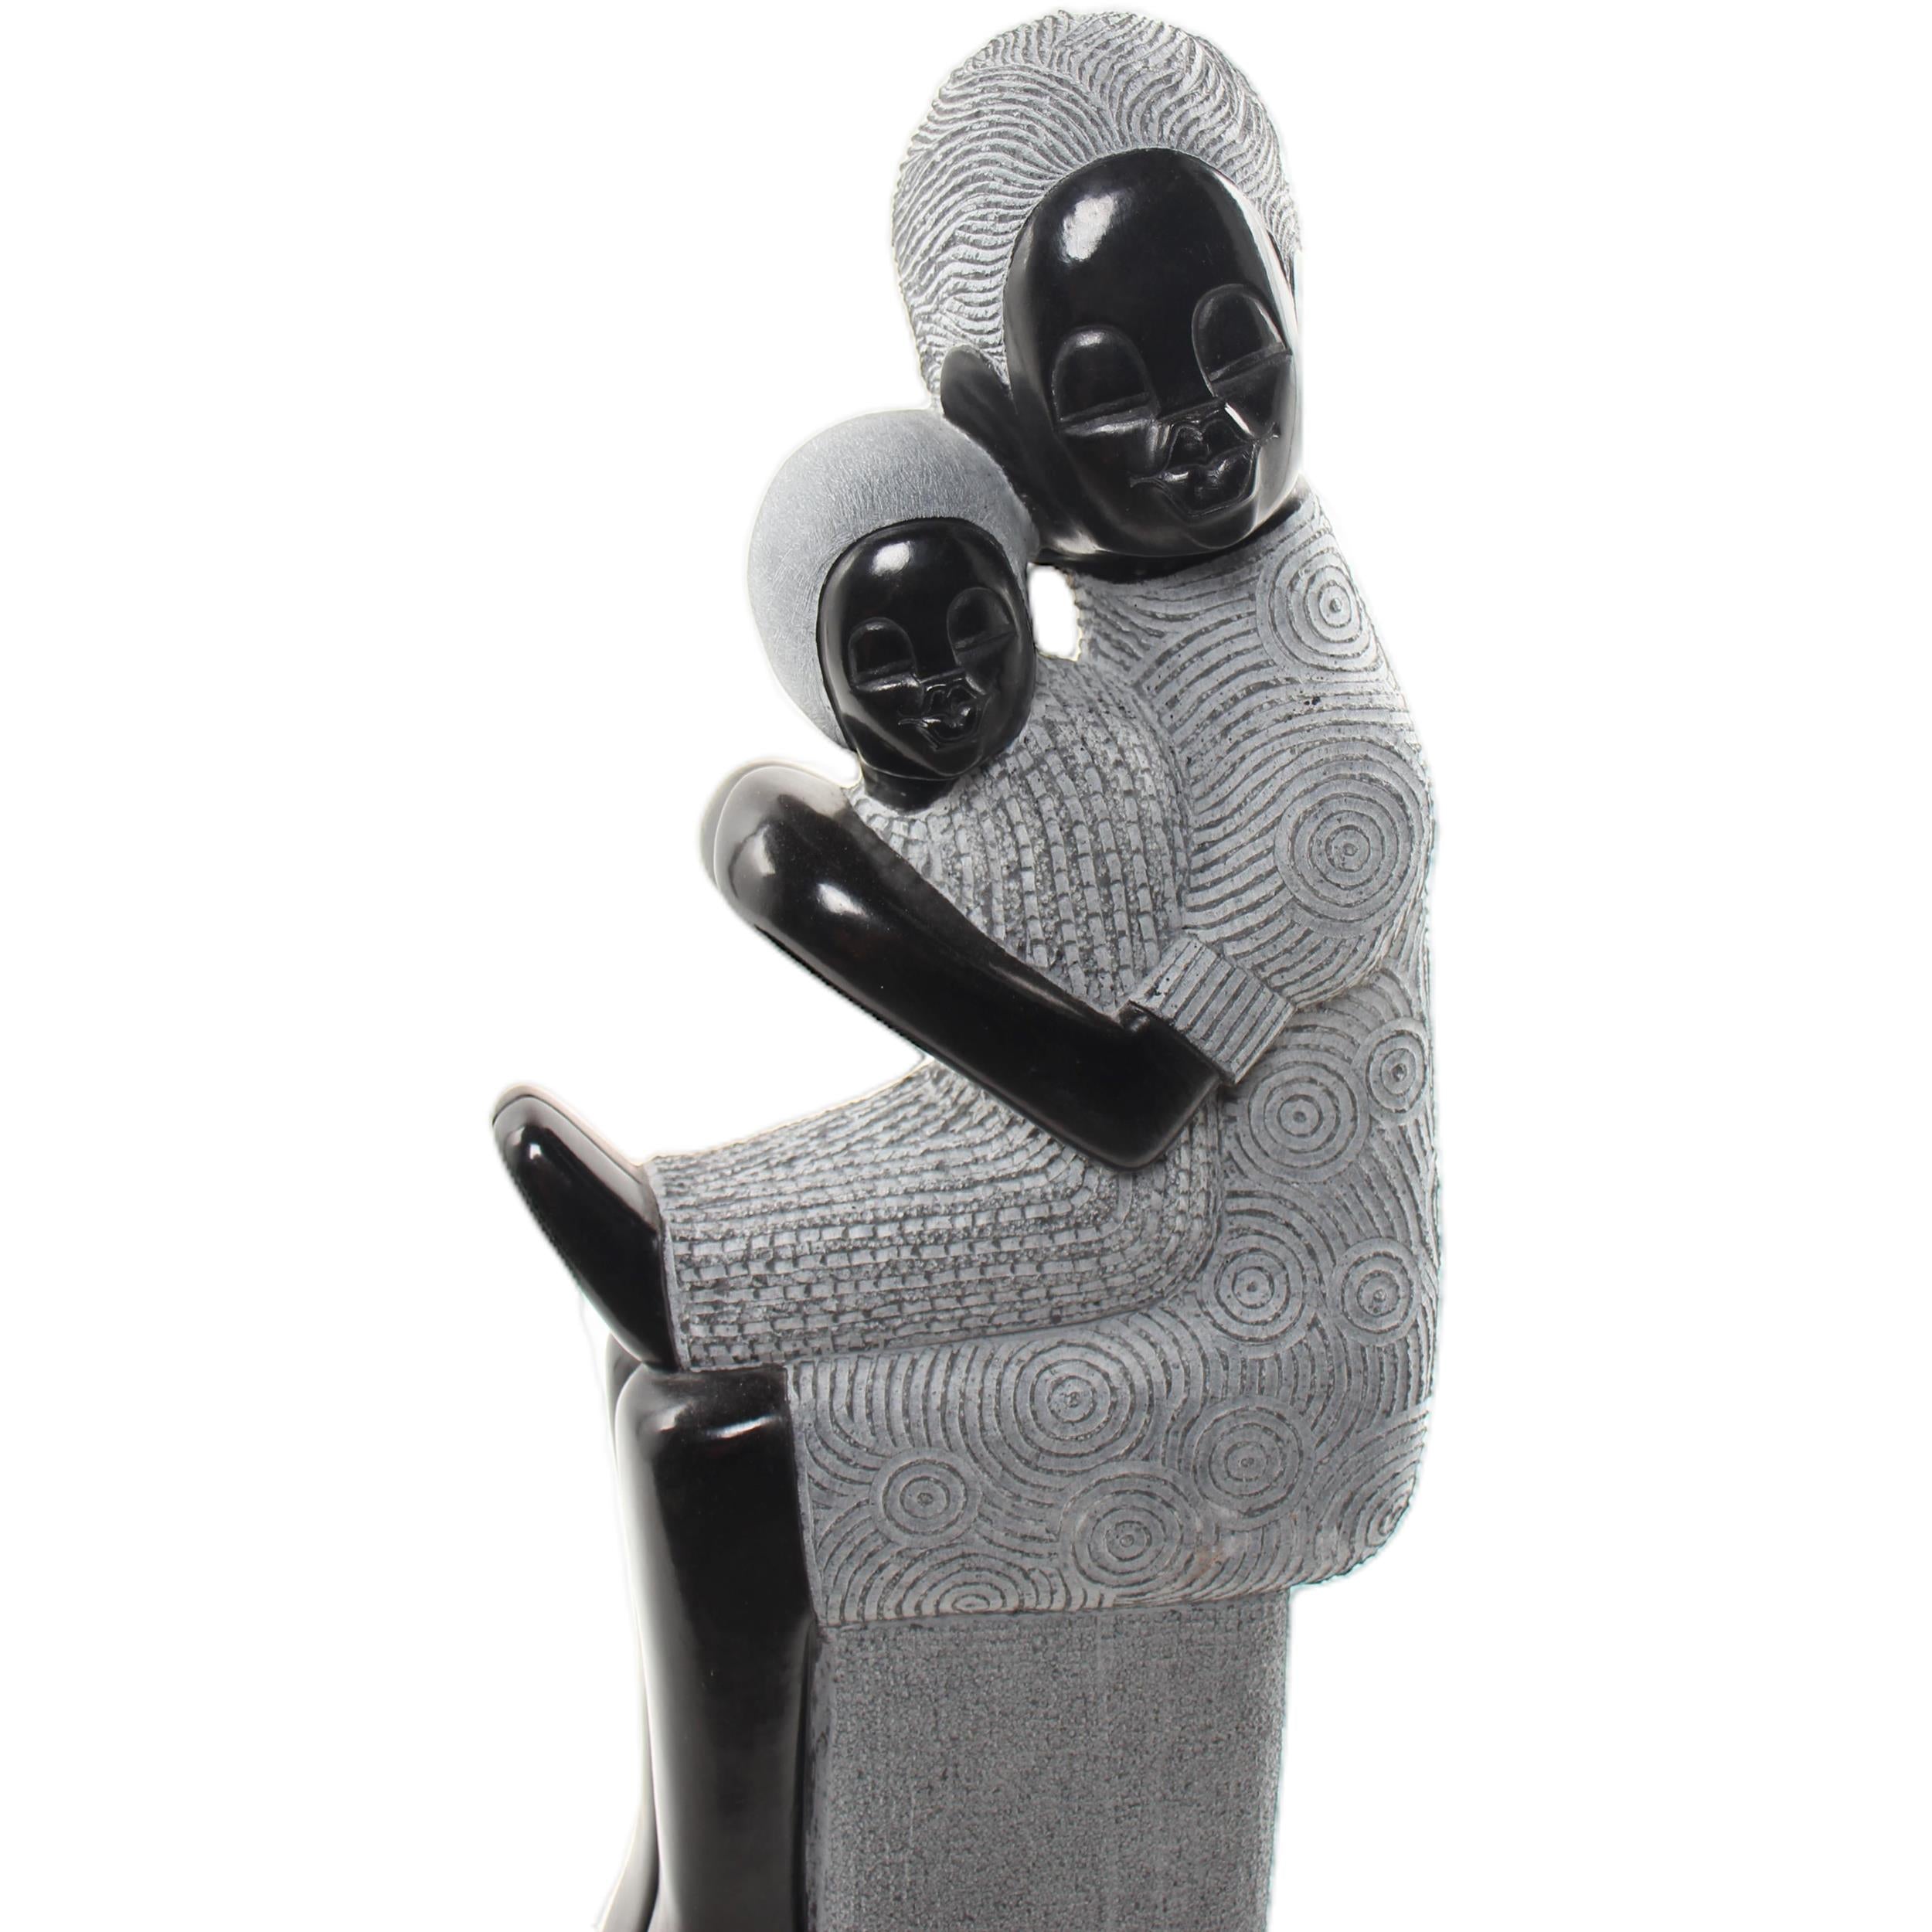 Shona Tribe Springstone Mother and Child ~28.0" Tall